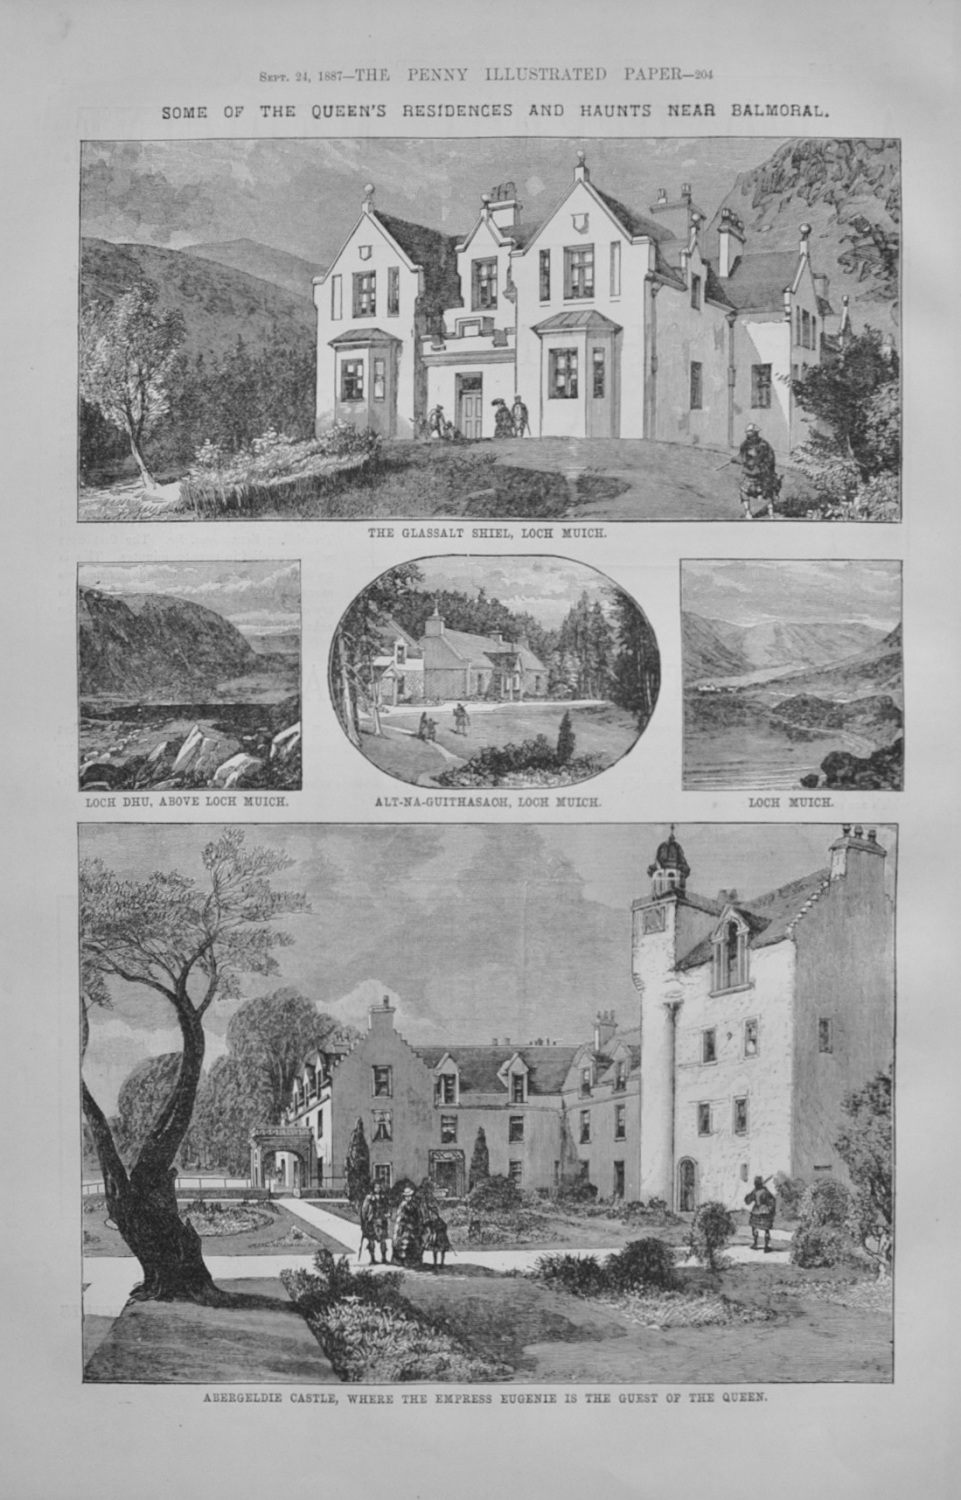 The Queen's Residences and Haunts near Balmoral - 1887